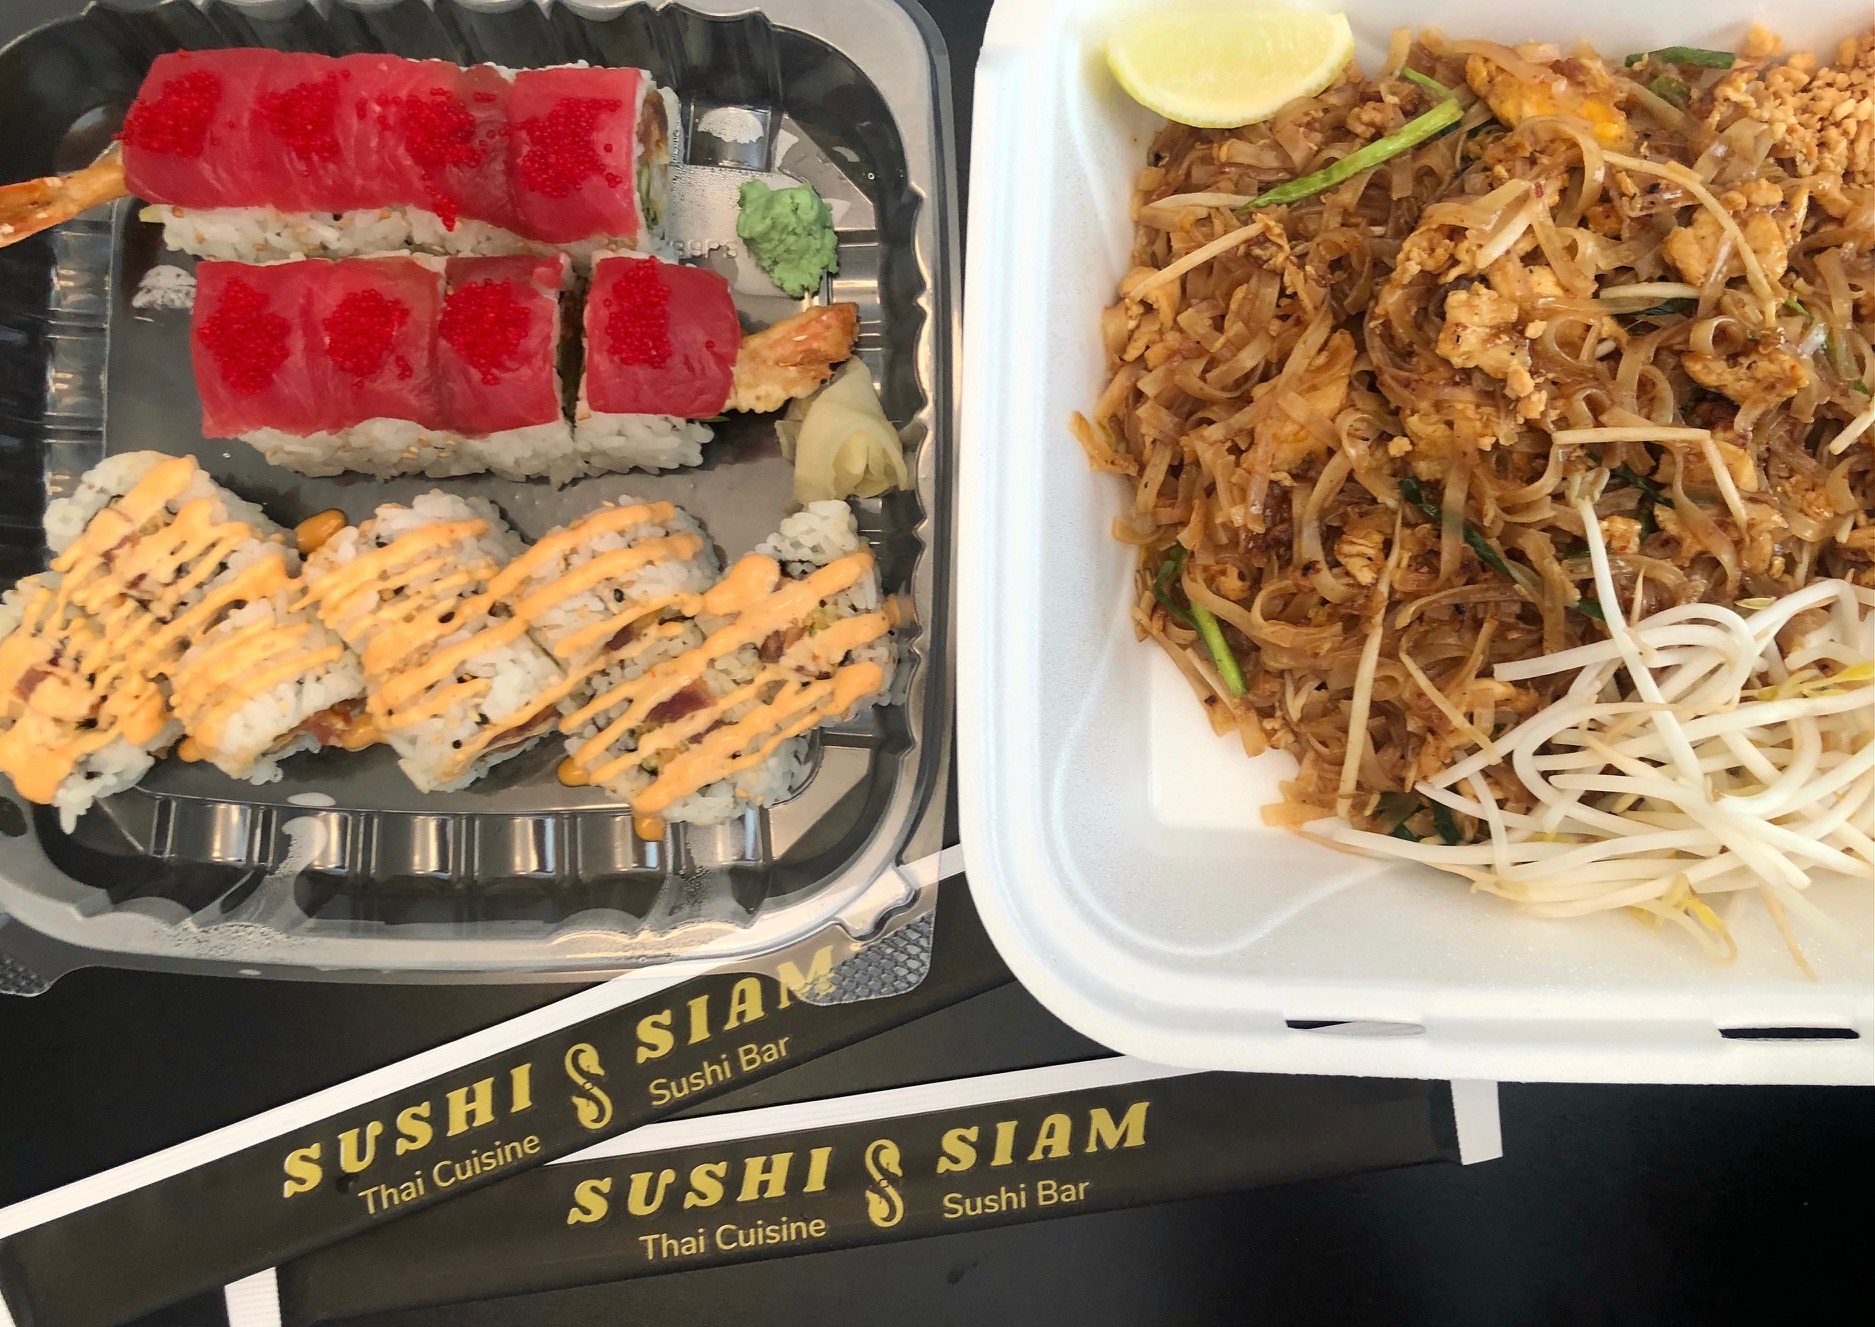 On a black table, there is a takeout order of sushi and pad Thai with two unopened chopsticks in black and white paper with the restaurant's name printed on it. Photo by Alyssa Buckley.